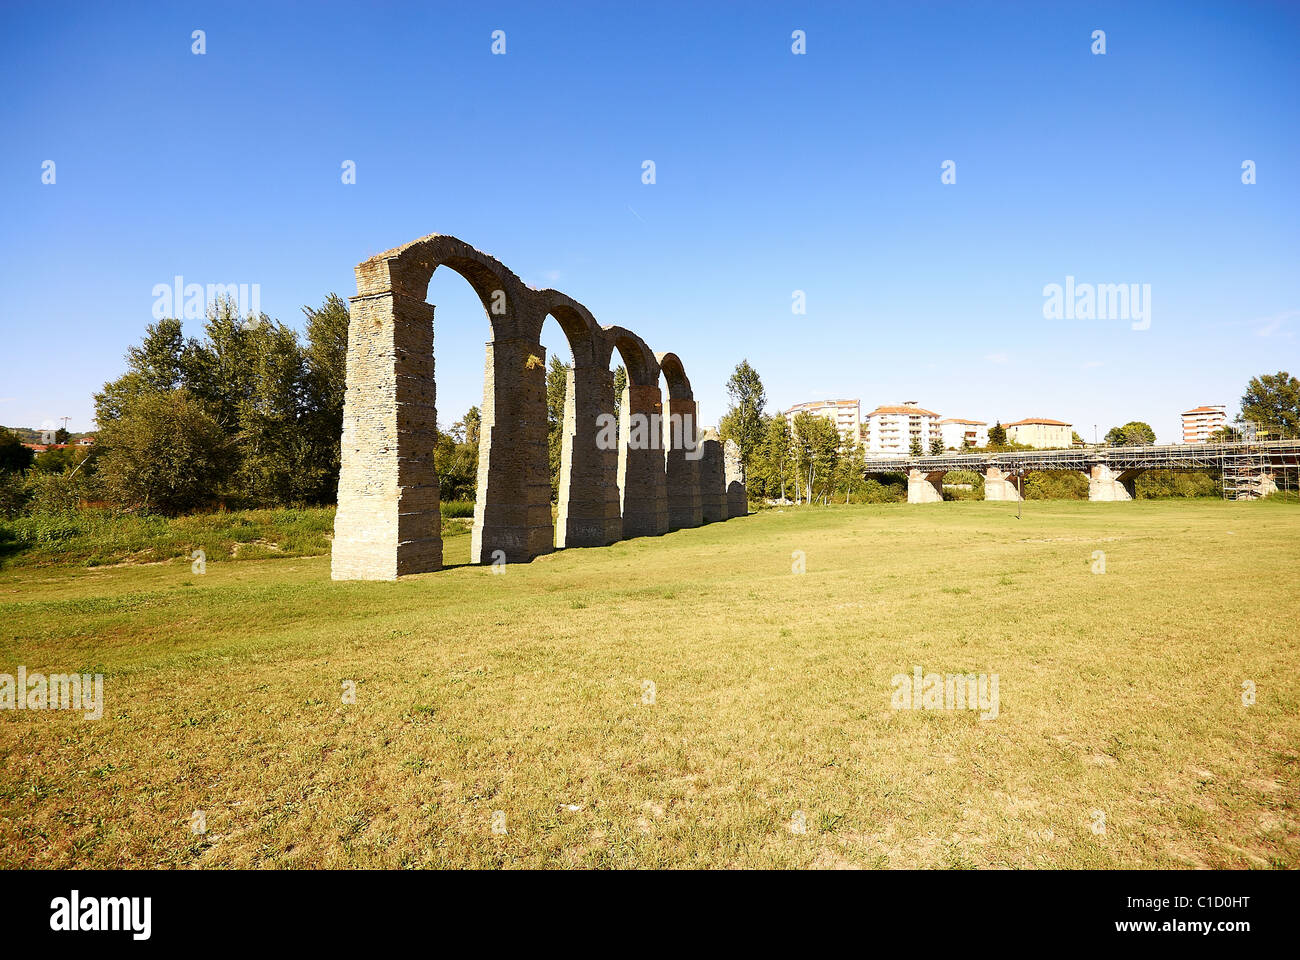 Acqui terme ancient ruins Aqueduct by the way contrasting enviroment details Italy Paolo Robaudi© Piedmont Romans empire the anc Stock Photo